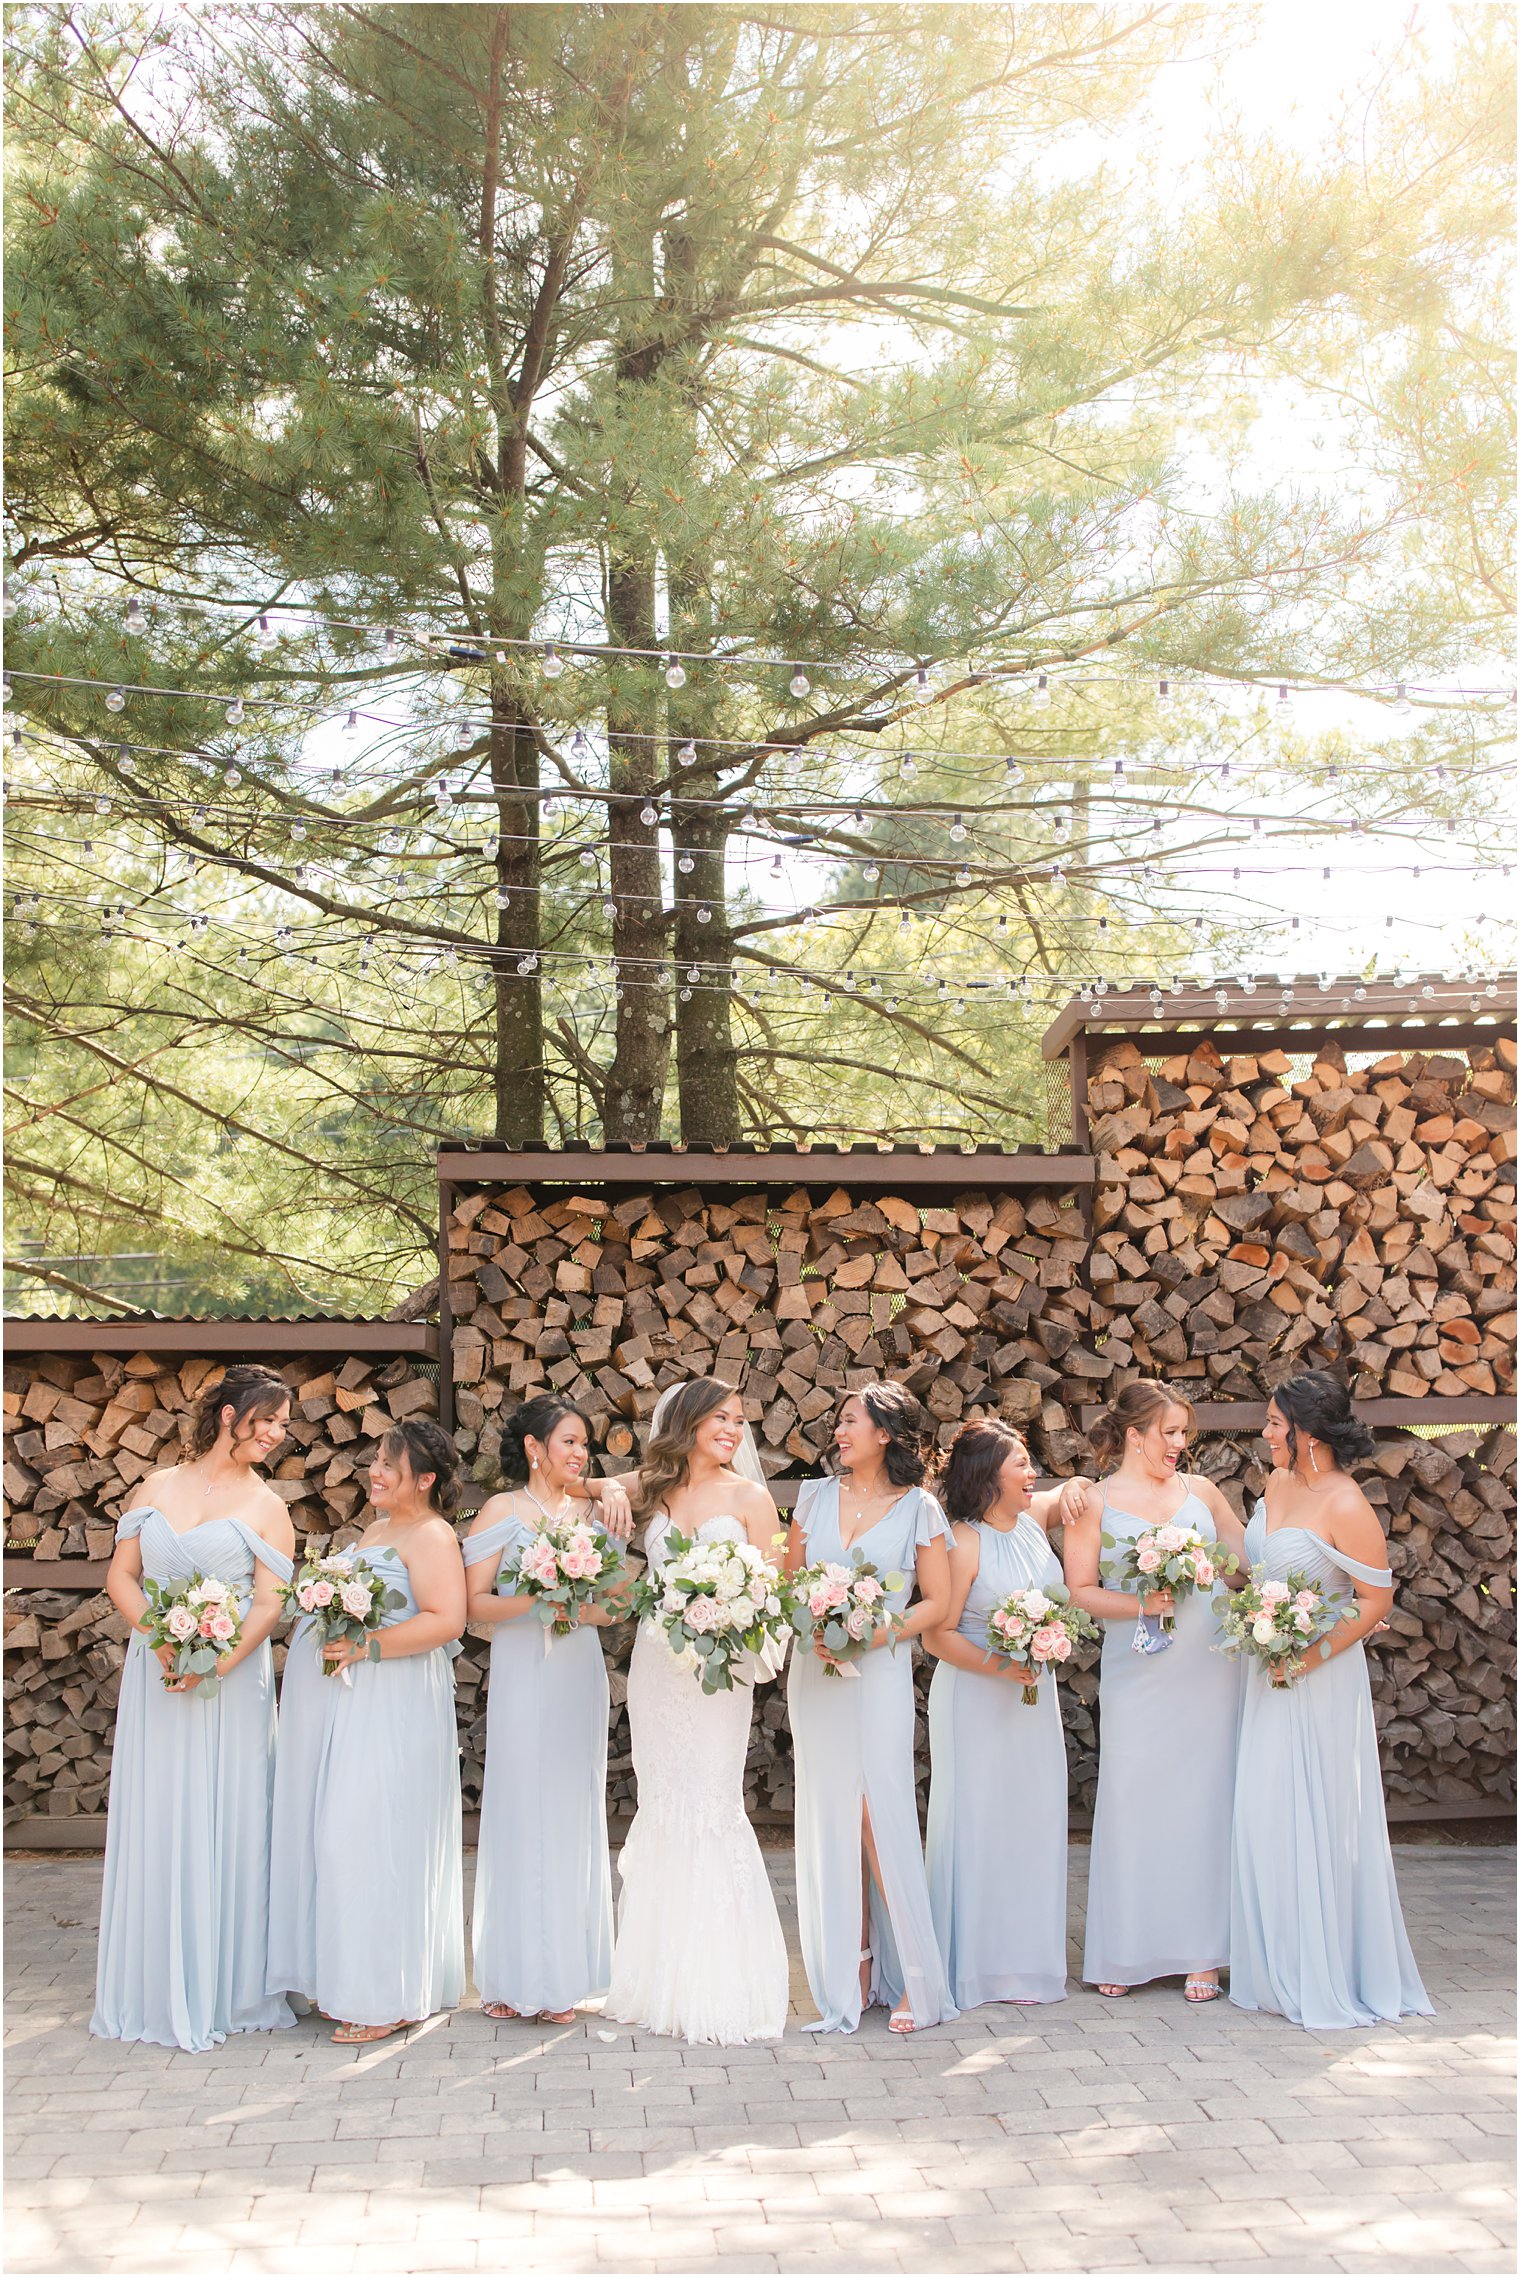 bridesmaids in blue gowns demonstrate trendy wedding colors